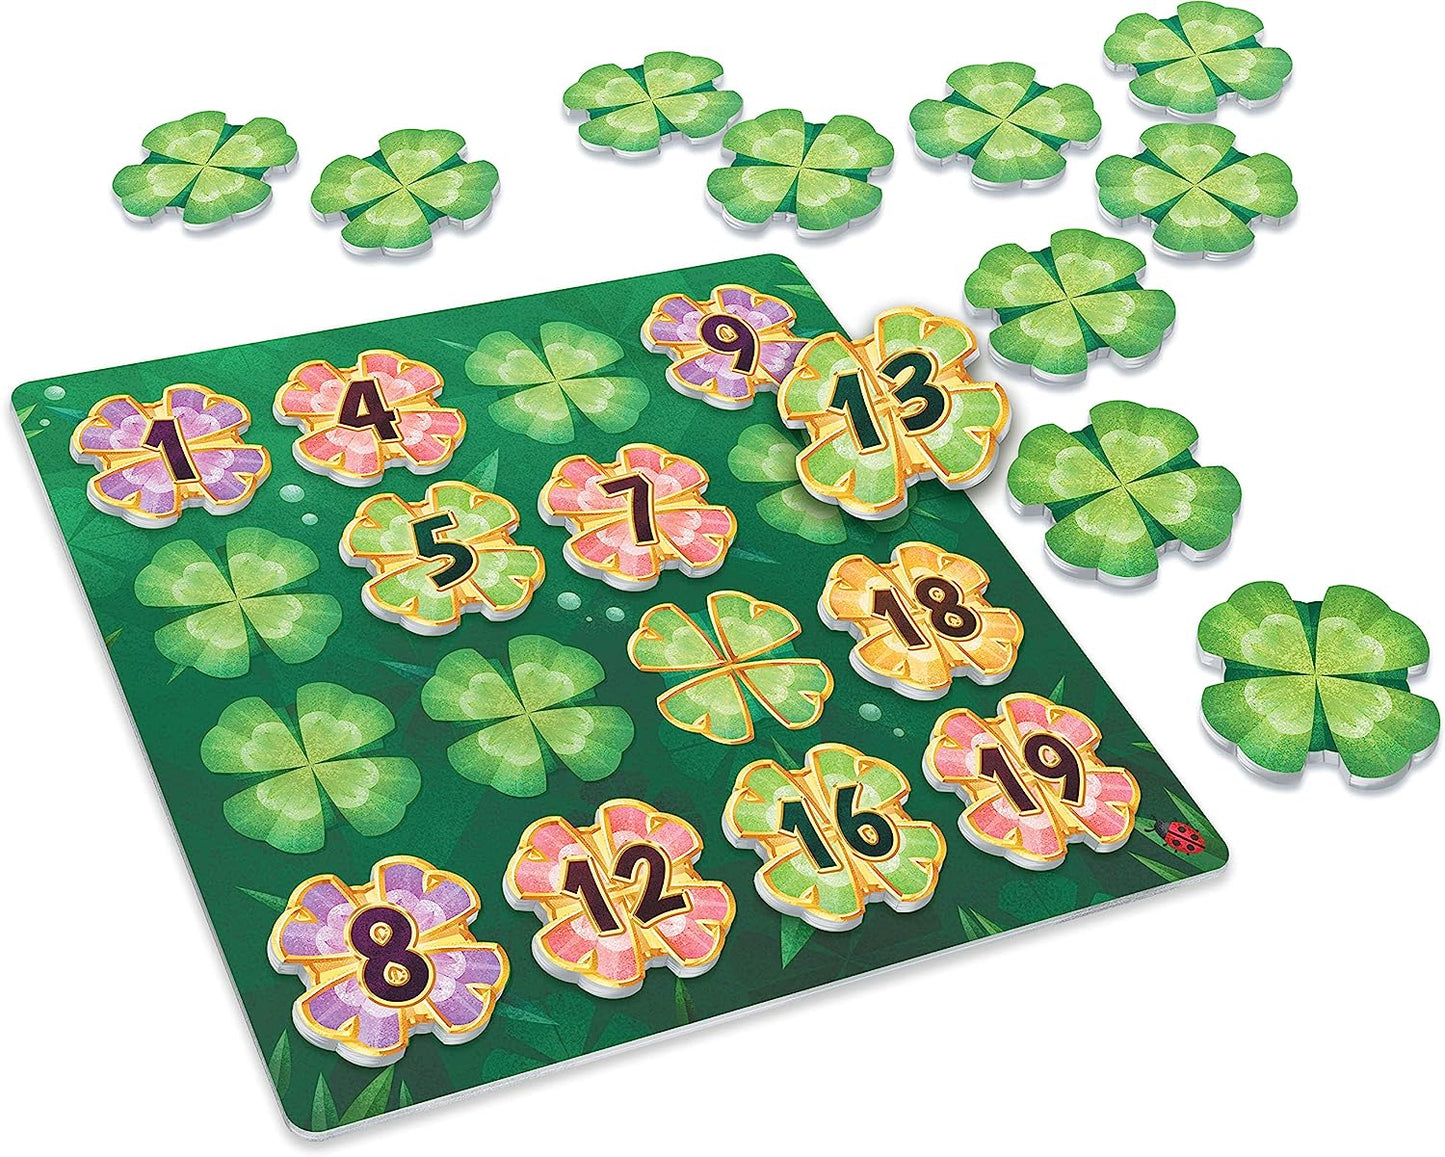 Lucky Numbers - Be First to Complete Your Garden; 1 Rule - Numbers in Each Row & Each Column Must be Arranged in Ascending Order; Draw, Place or Swap Clovers, 1-4 Players, 20 min, 8+